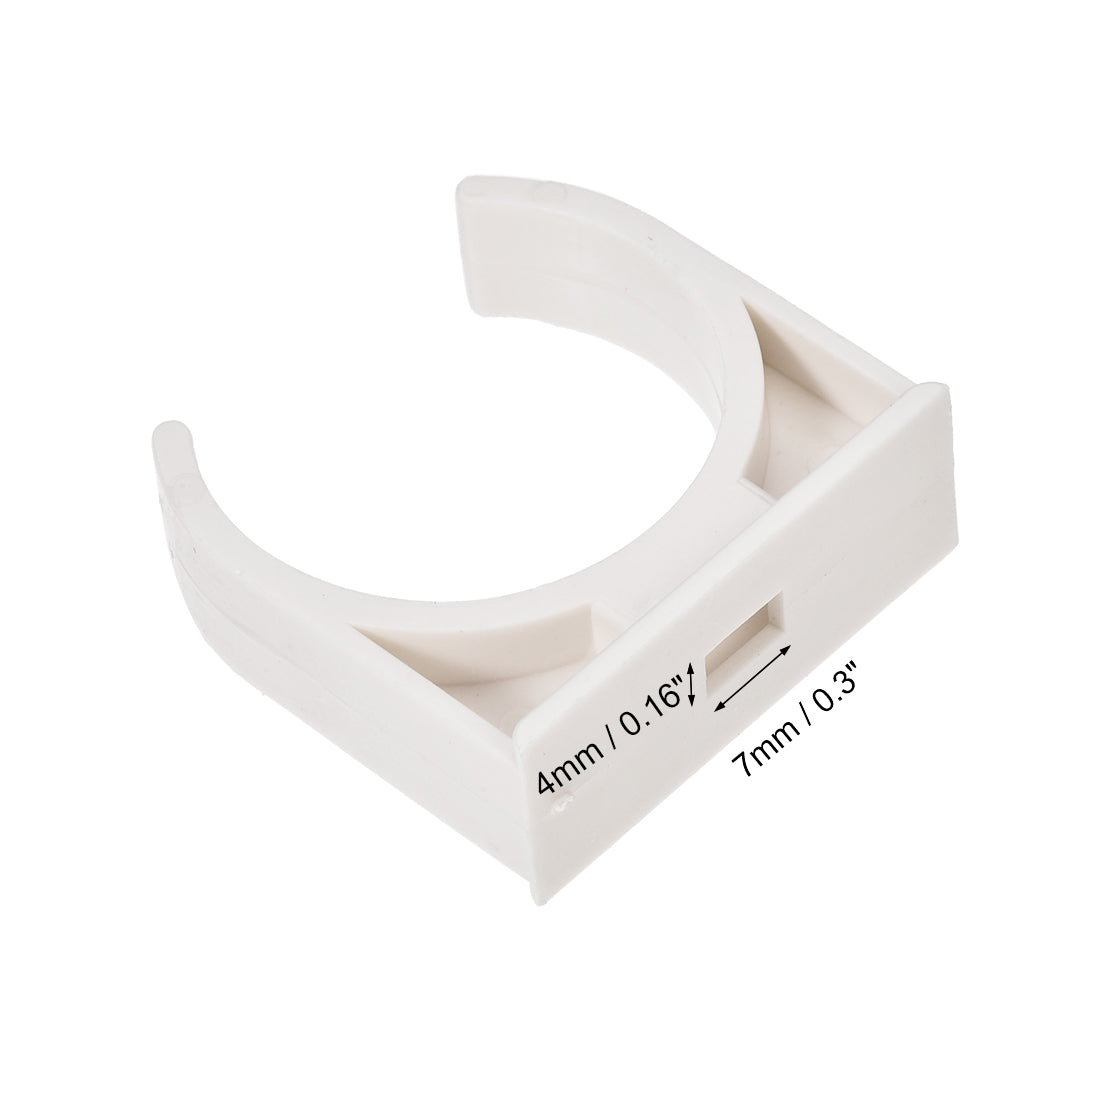 uxcell Uxcell Home PVC U Shaped Water Supply Pipe Holder Clamps Clips White 32 mm Dia 15 Pcs